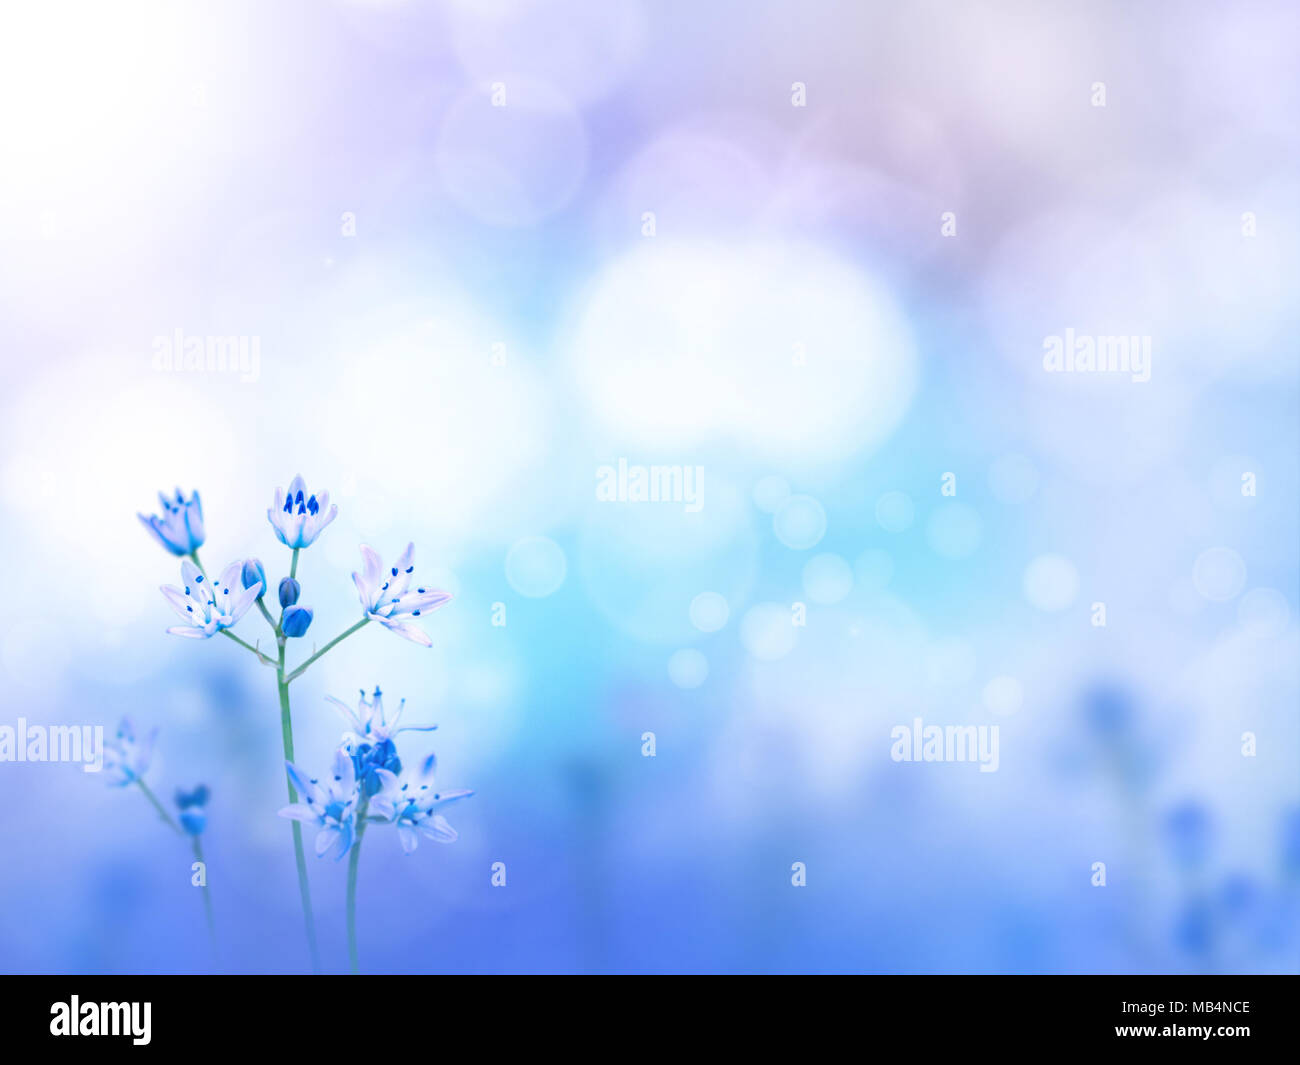 Light purple flowers on the blue turquoise blurred background. Floral desktop. Stock Photo